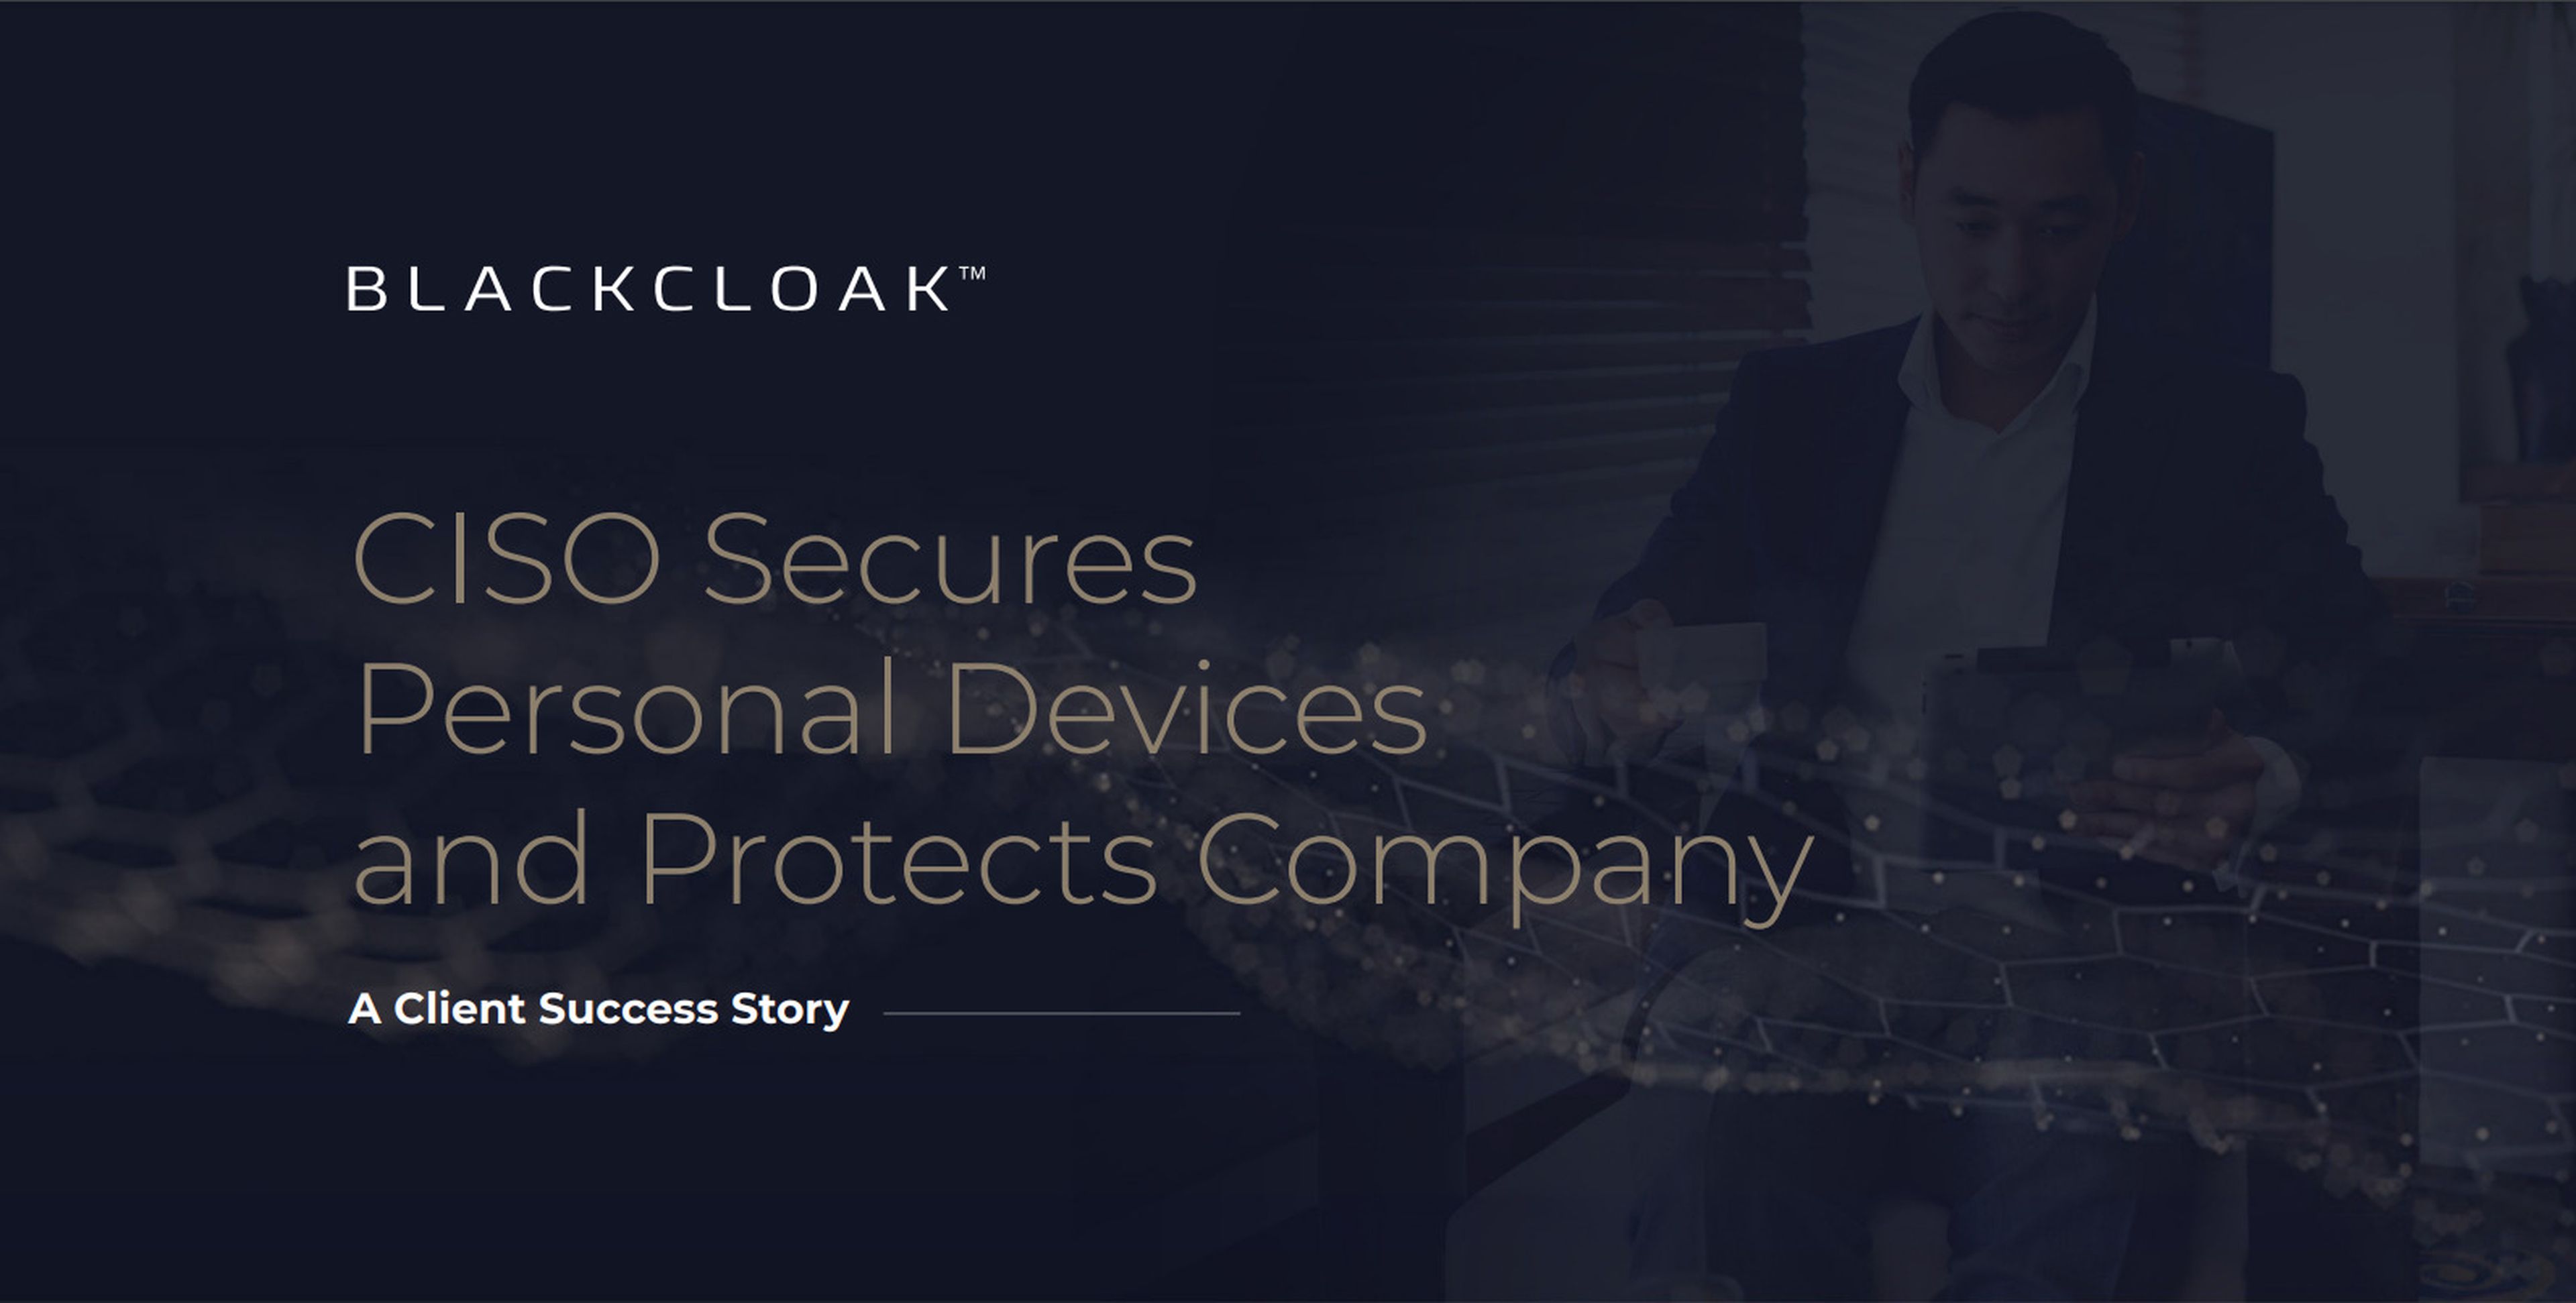 CISO Secures Personal Devices and Protects Company